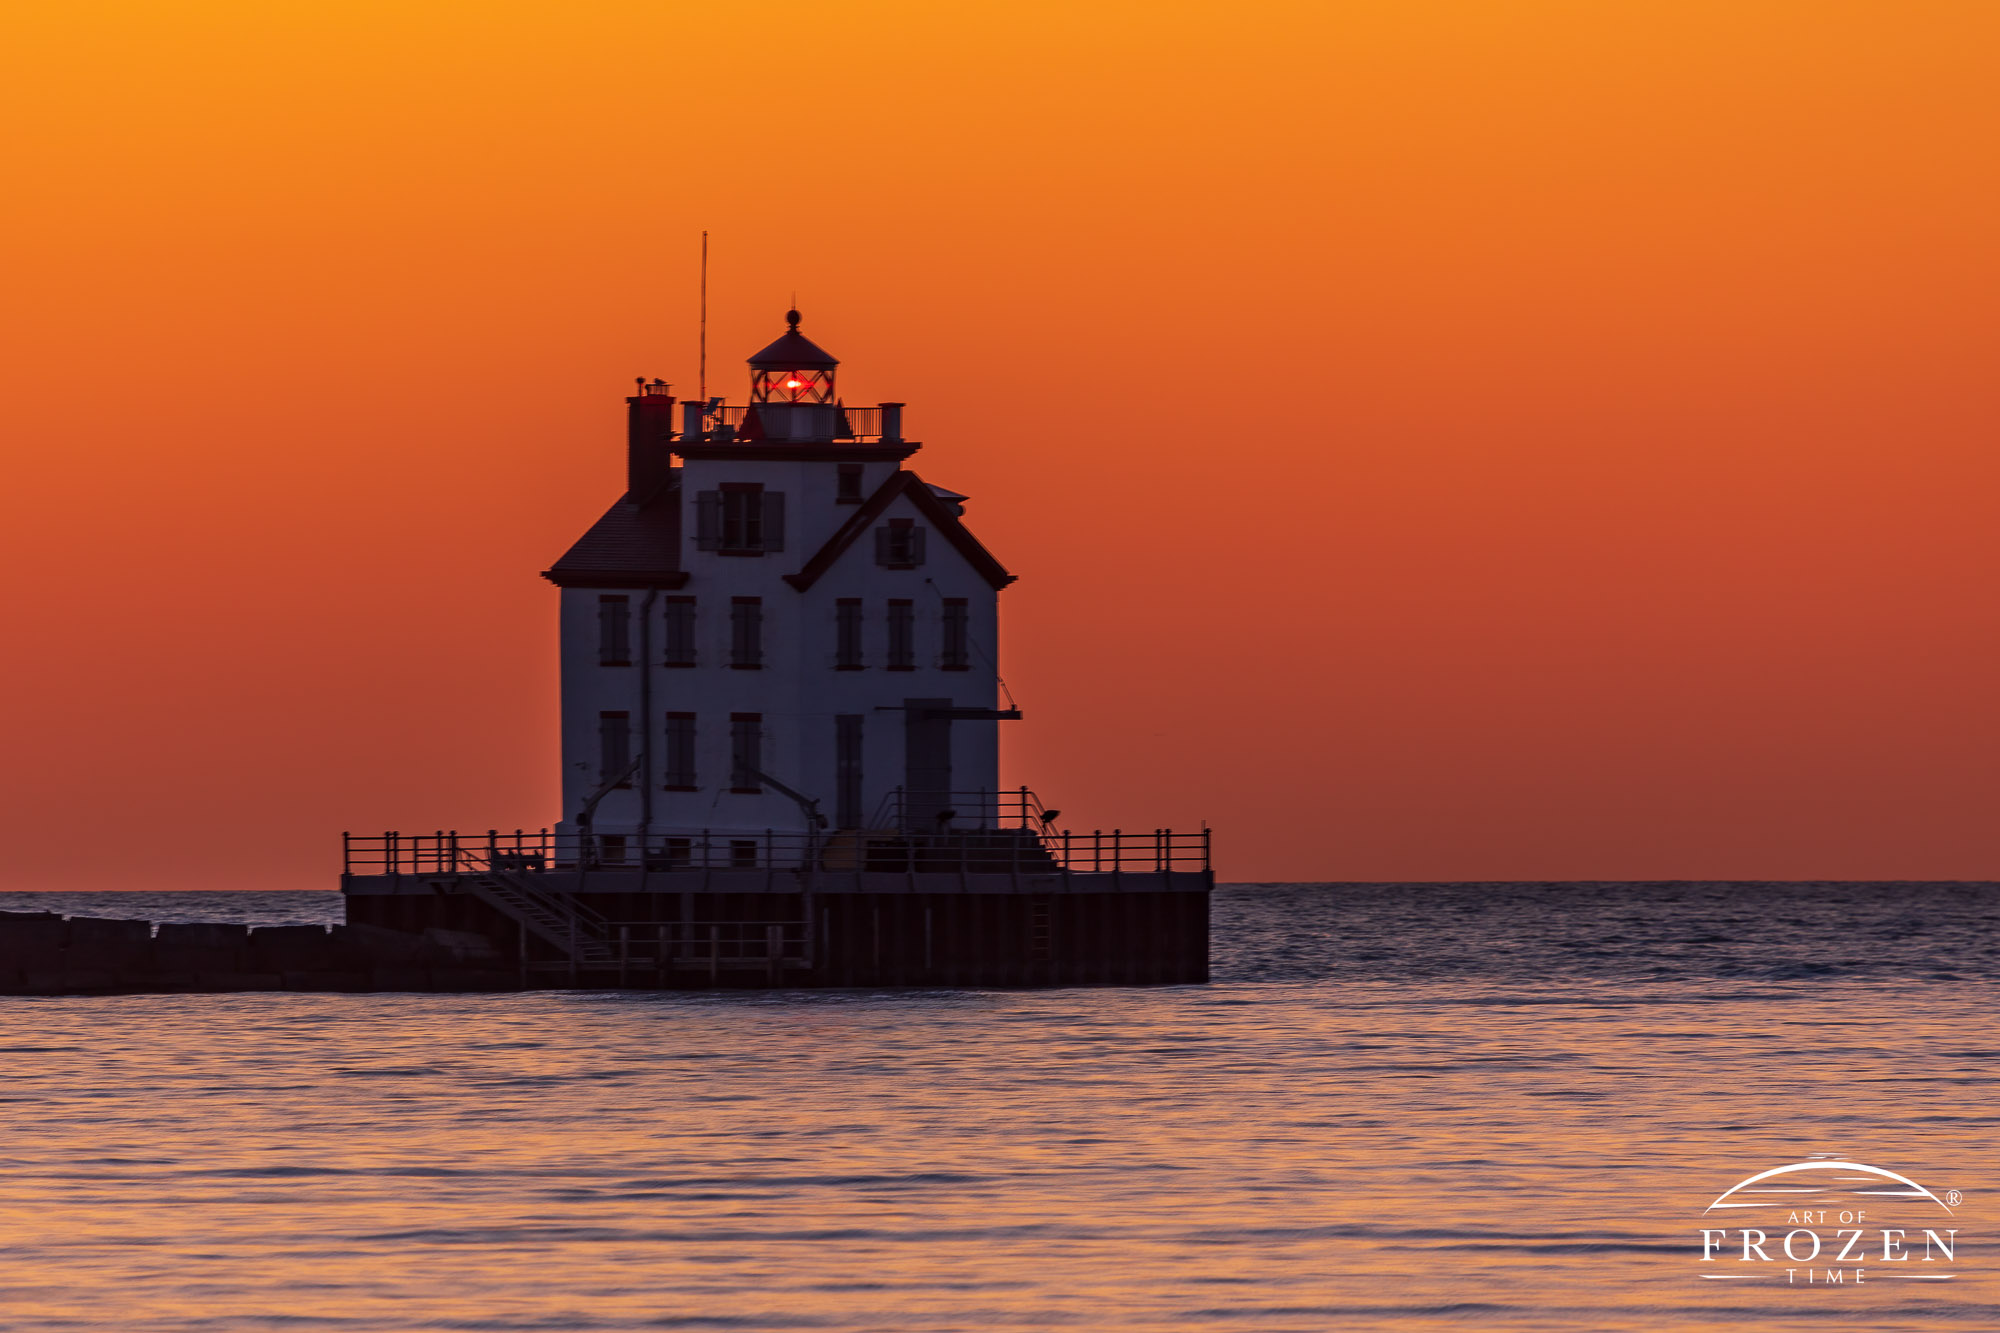 Twilight over Lorain Lighthouse as the clear Lake Erie horizon takes on varying orange hues while the lake surface refracts light from the darker blue skies above.